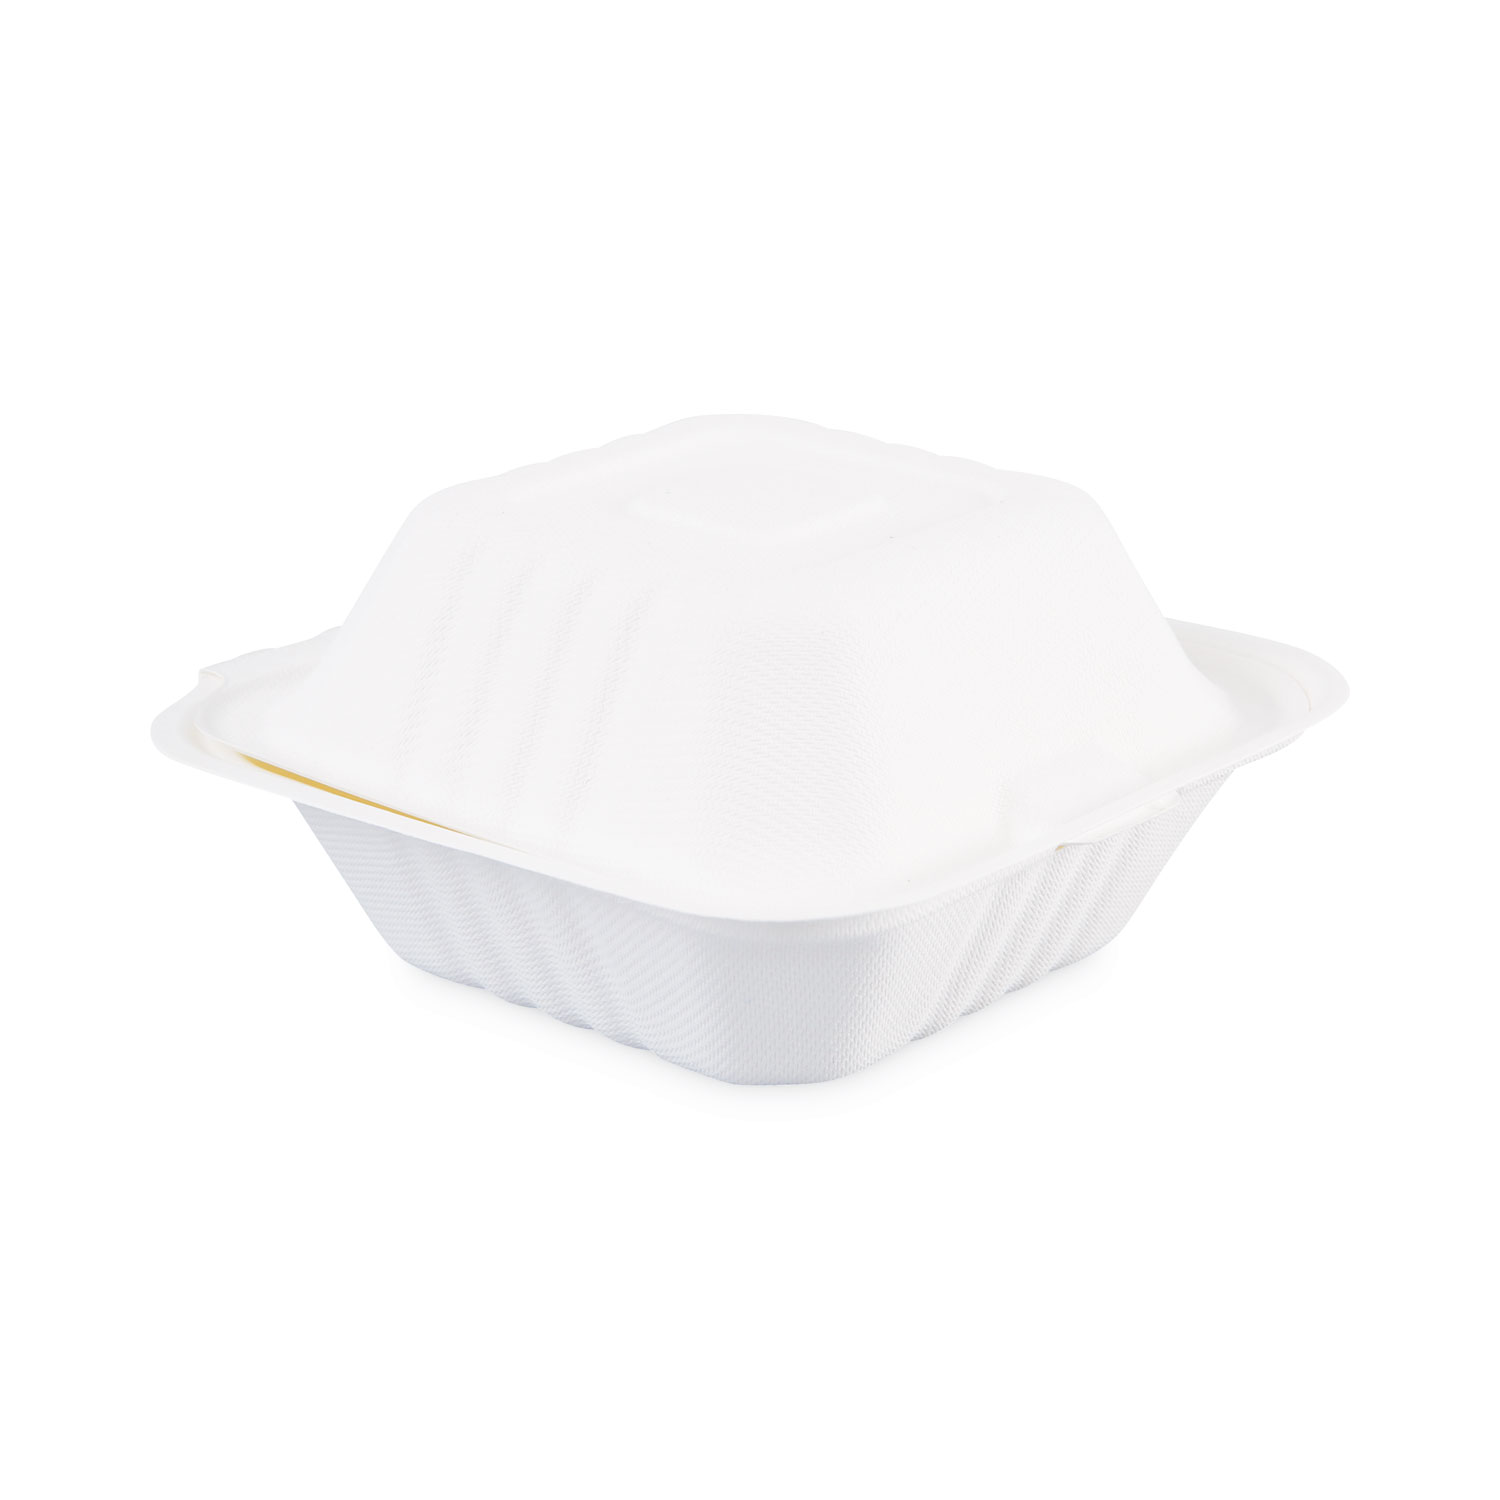 Boardwalk - BWKHINGEWF3CM9 - Bagasse Molded Fiber Food Containers, Hinged-Lid, 3-Compartment 9 x 9, White, 100/Sleeve, 2 Sleeves/Carton